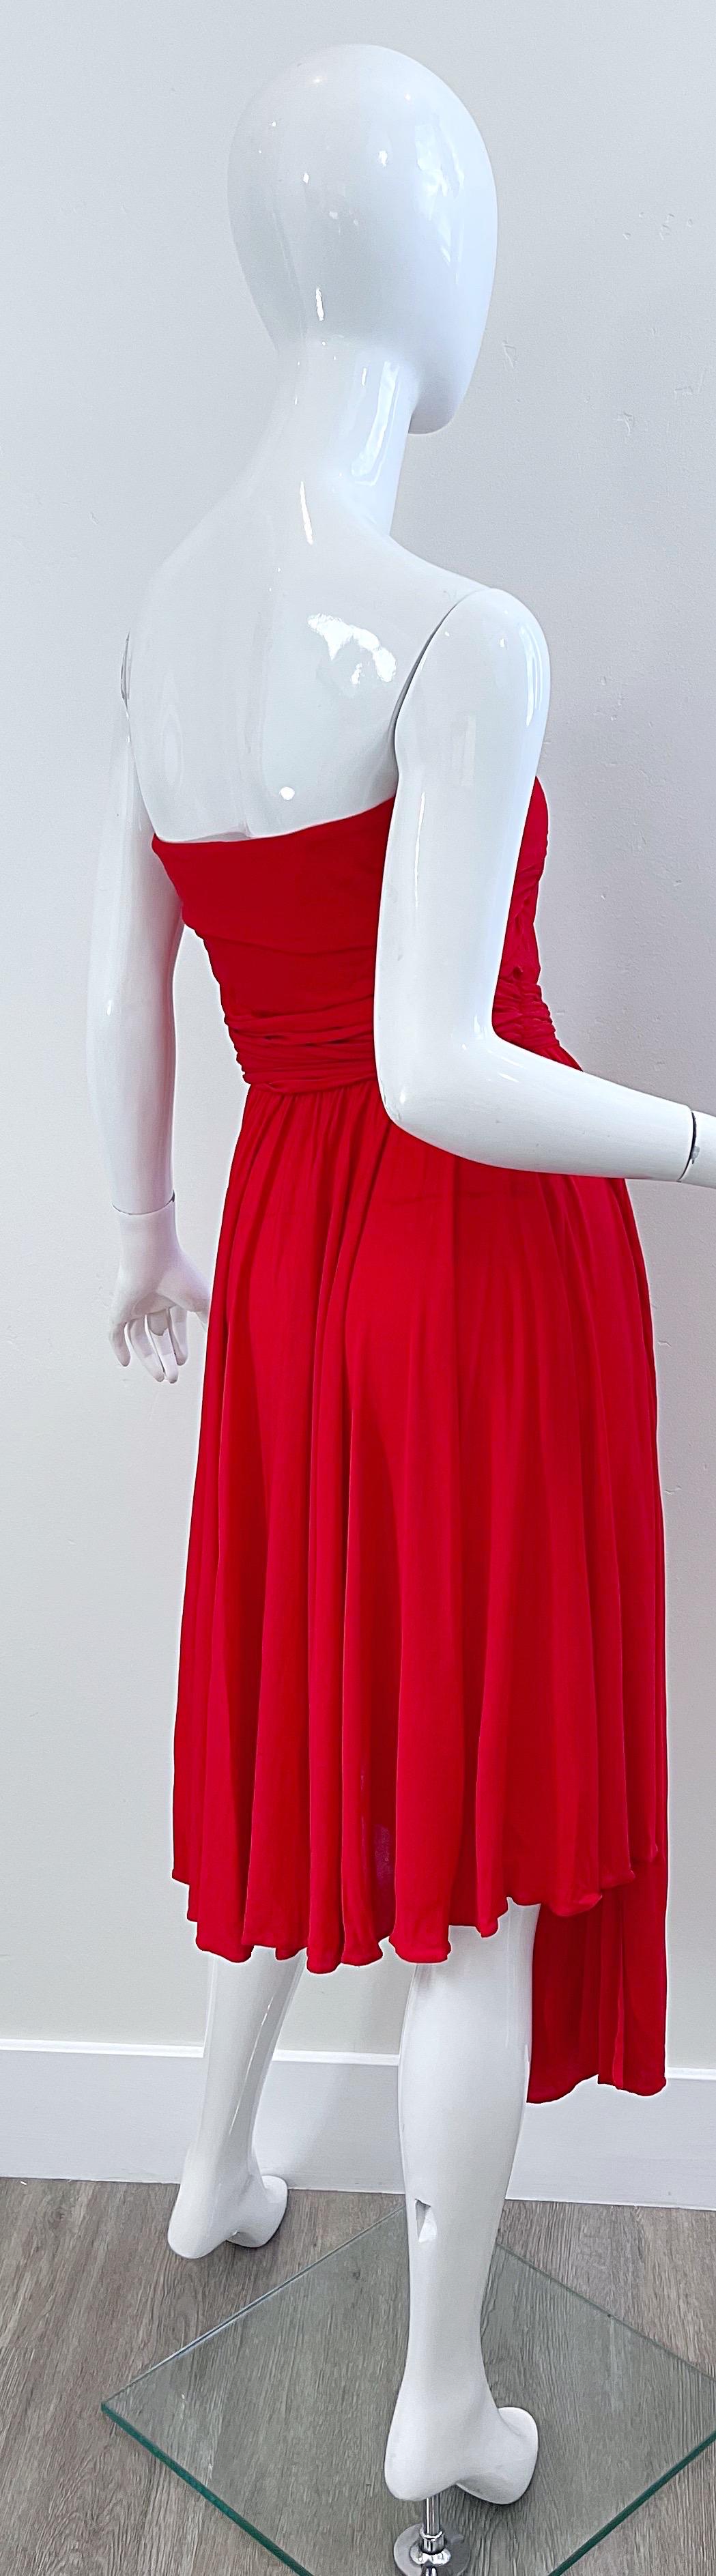 Runway Yves Saint Laurent S/S 1989 Lipstick Red Rayon Jersey Strapless 80s Dress For Sale 9